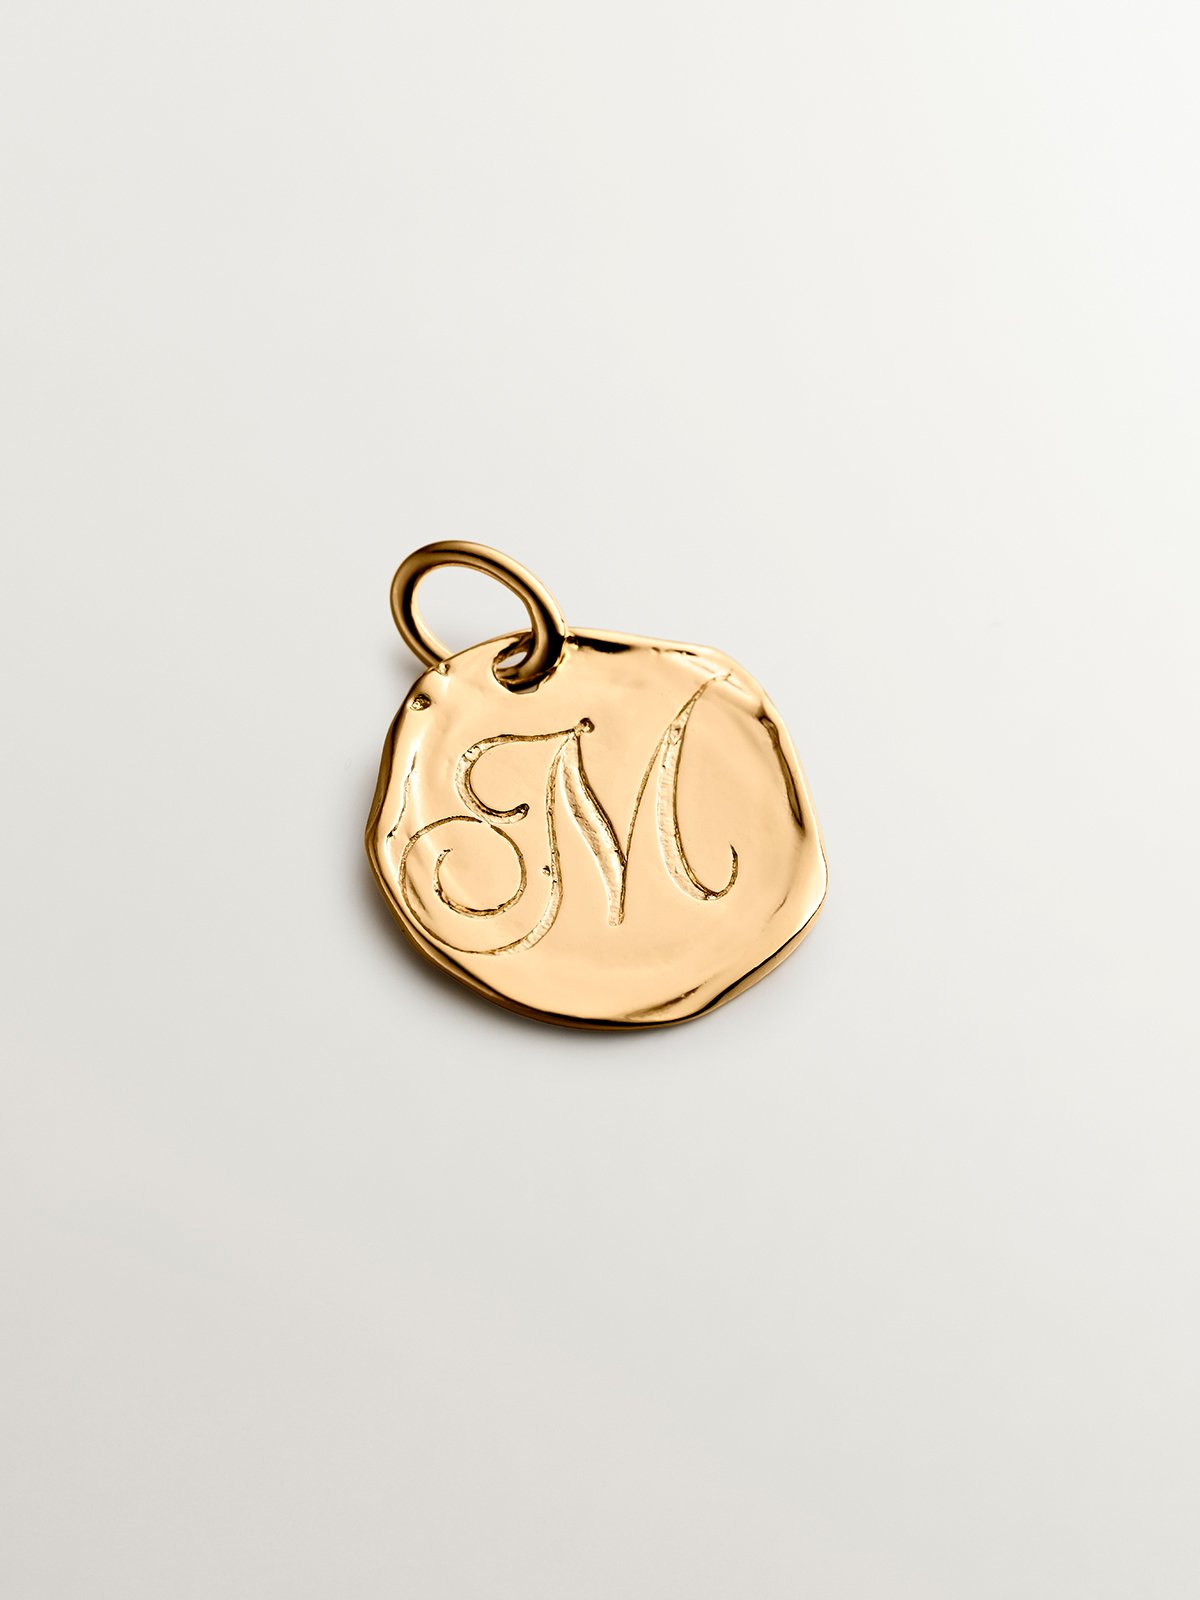 Handcrafted charm made of 925 silver bathed in 18K yellow gold with initial M.